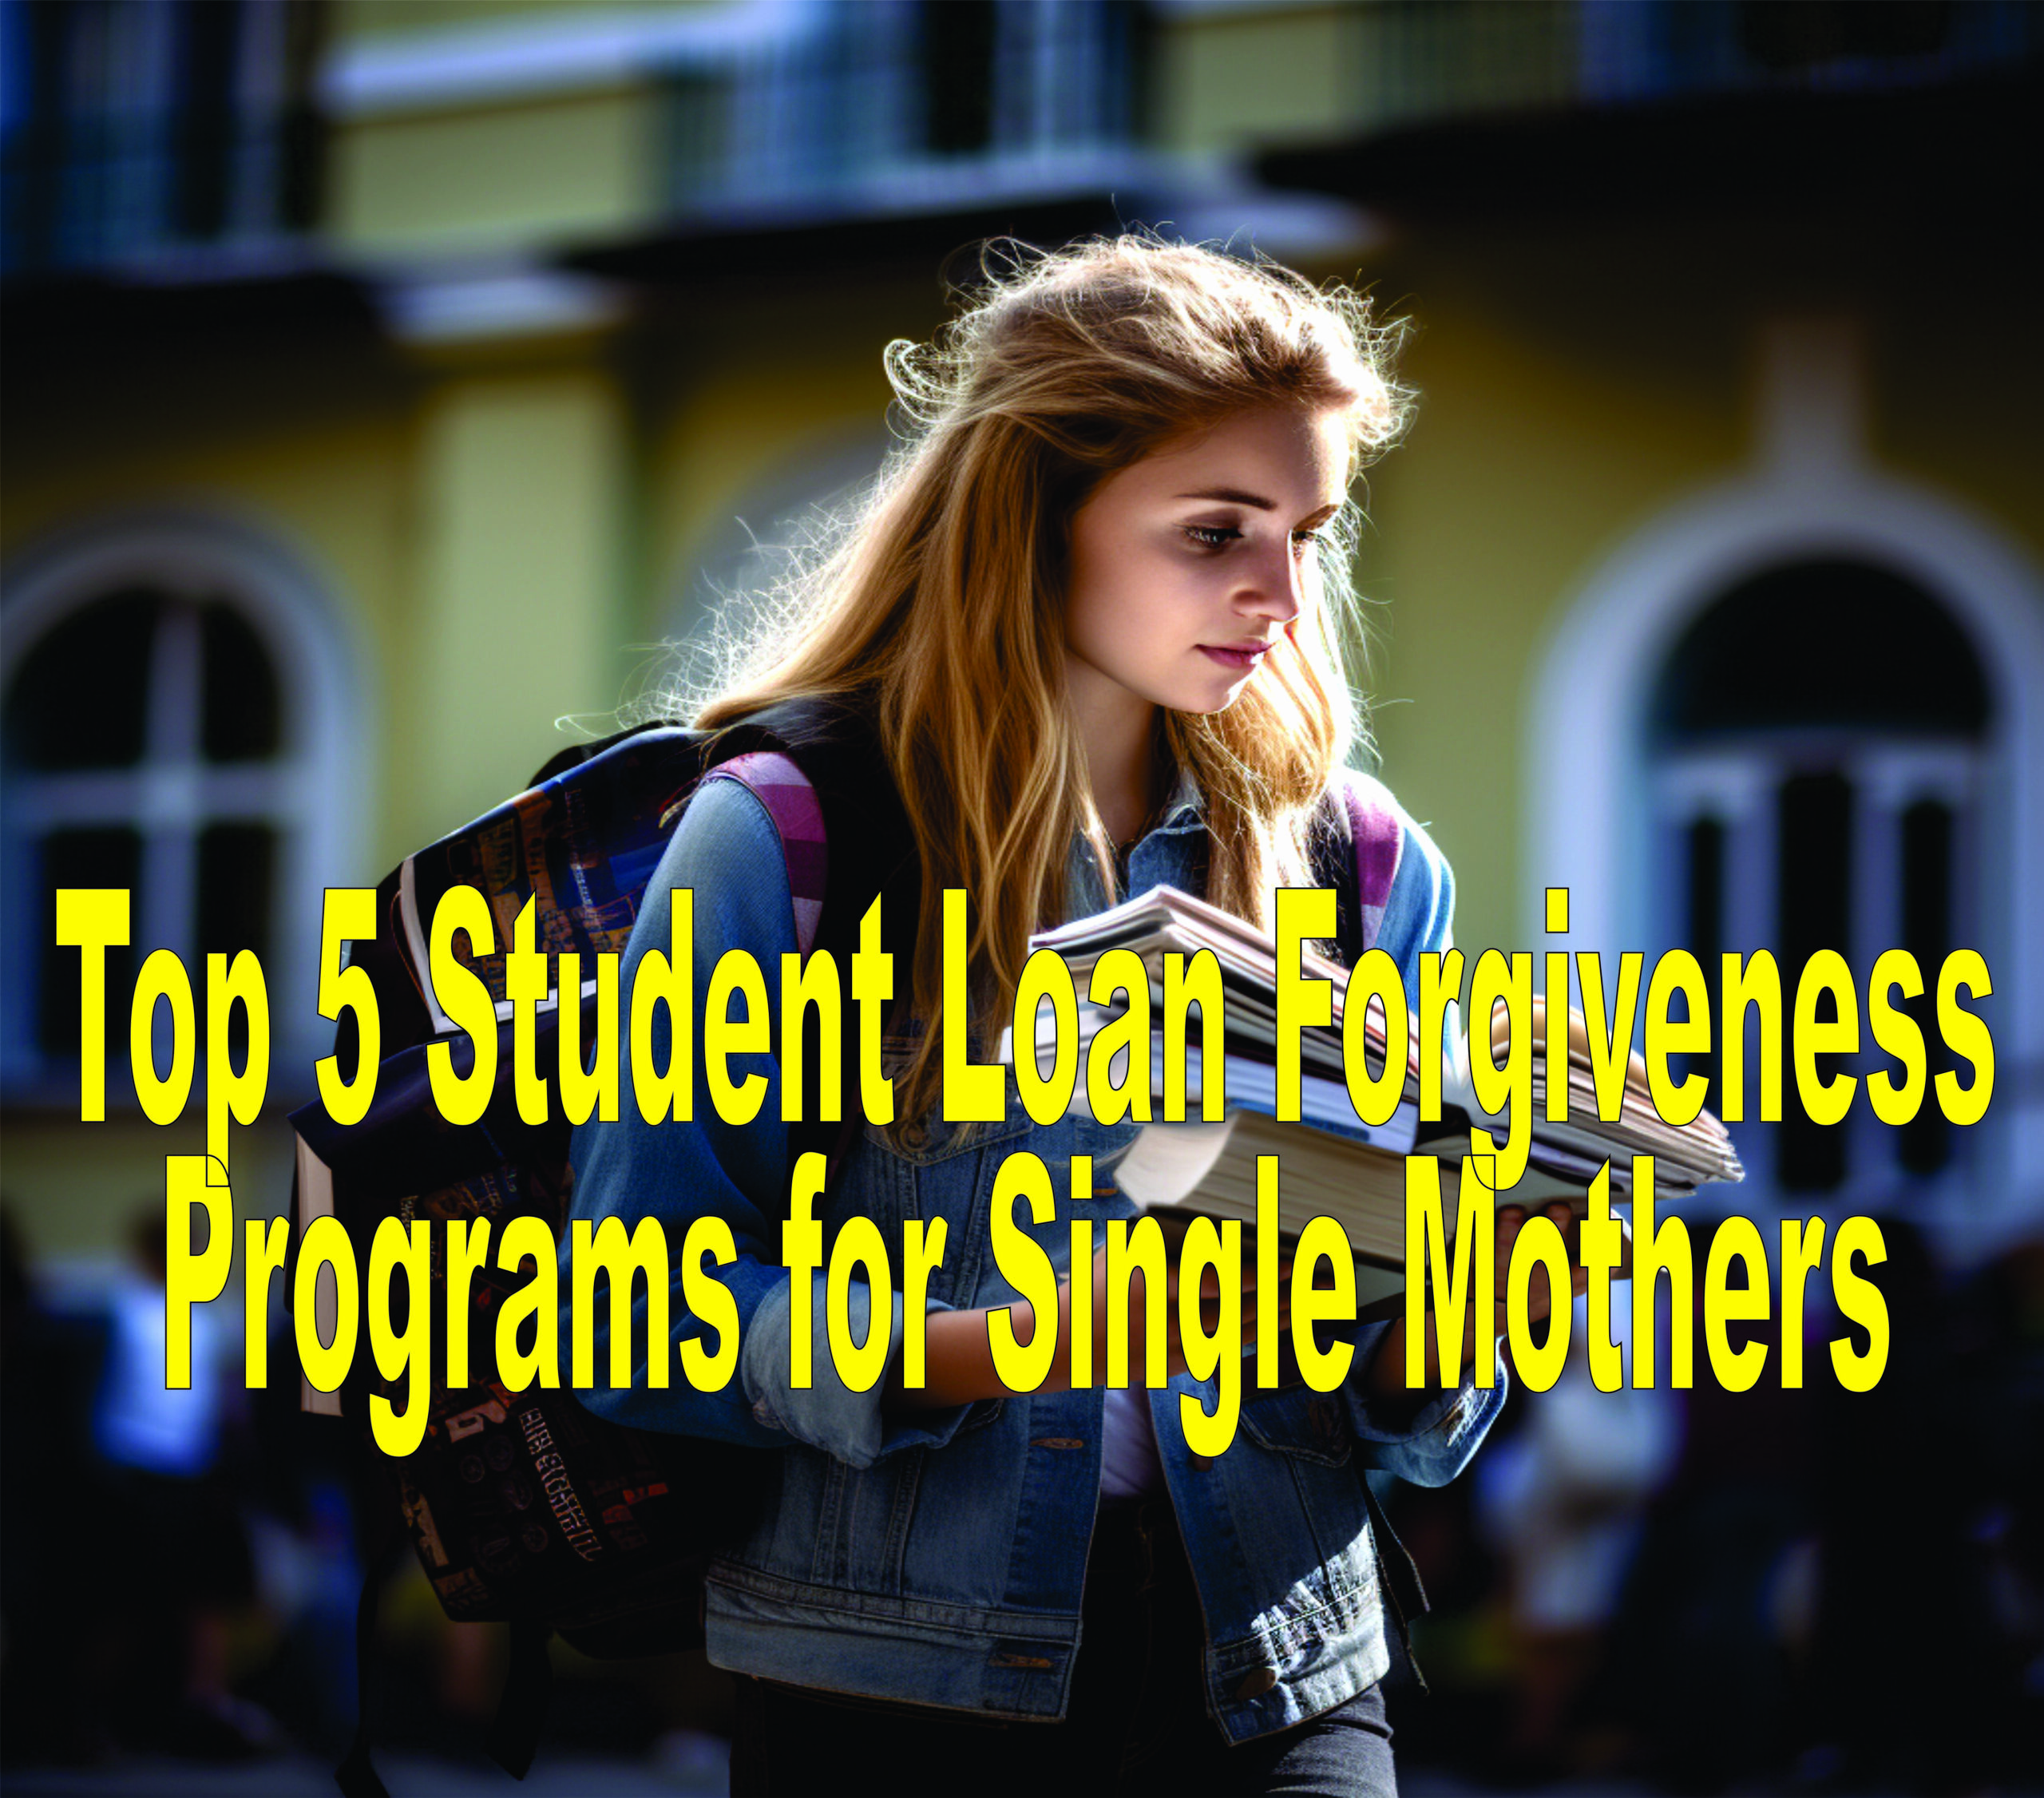 Top 5 Student Loan Forgiveness Programs For Single Mothers